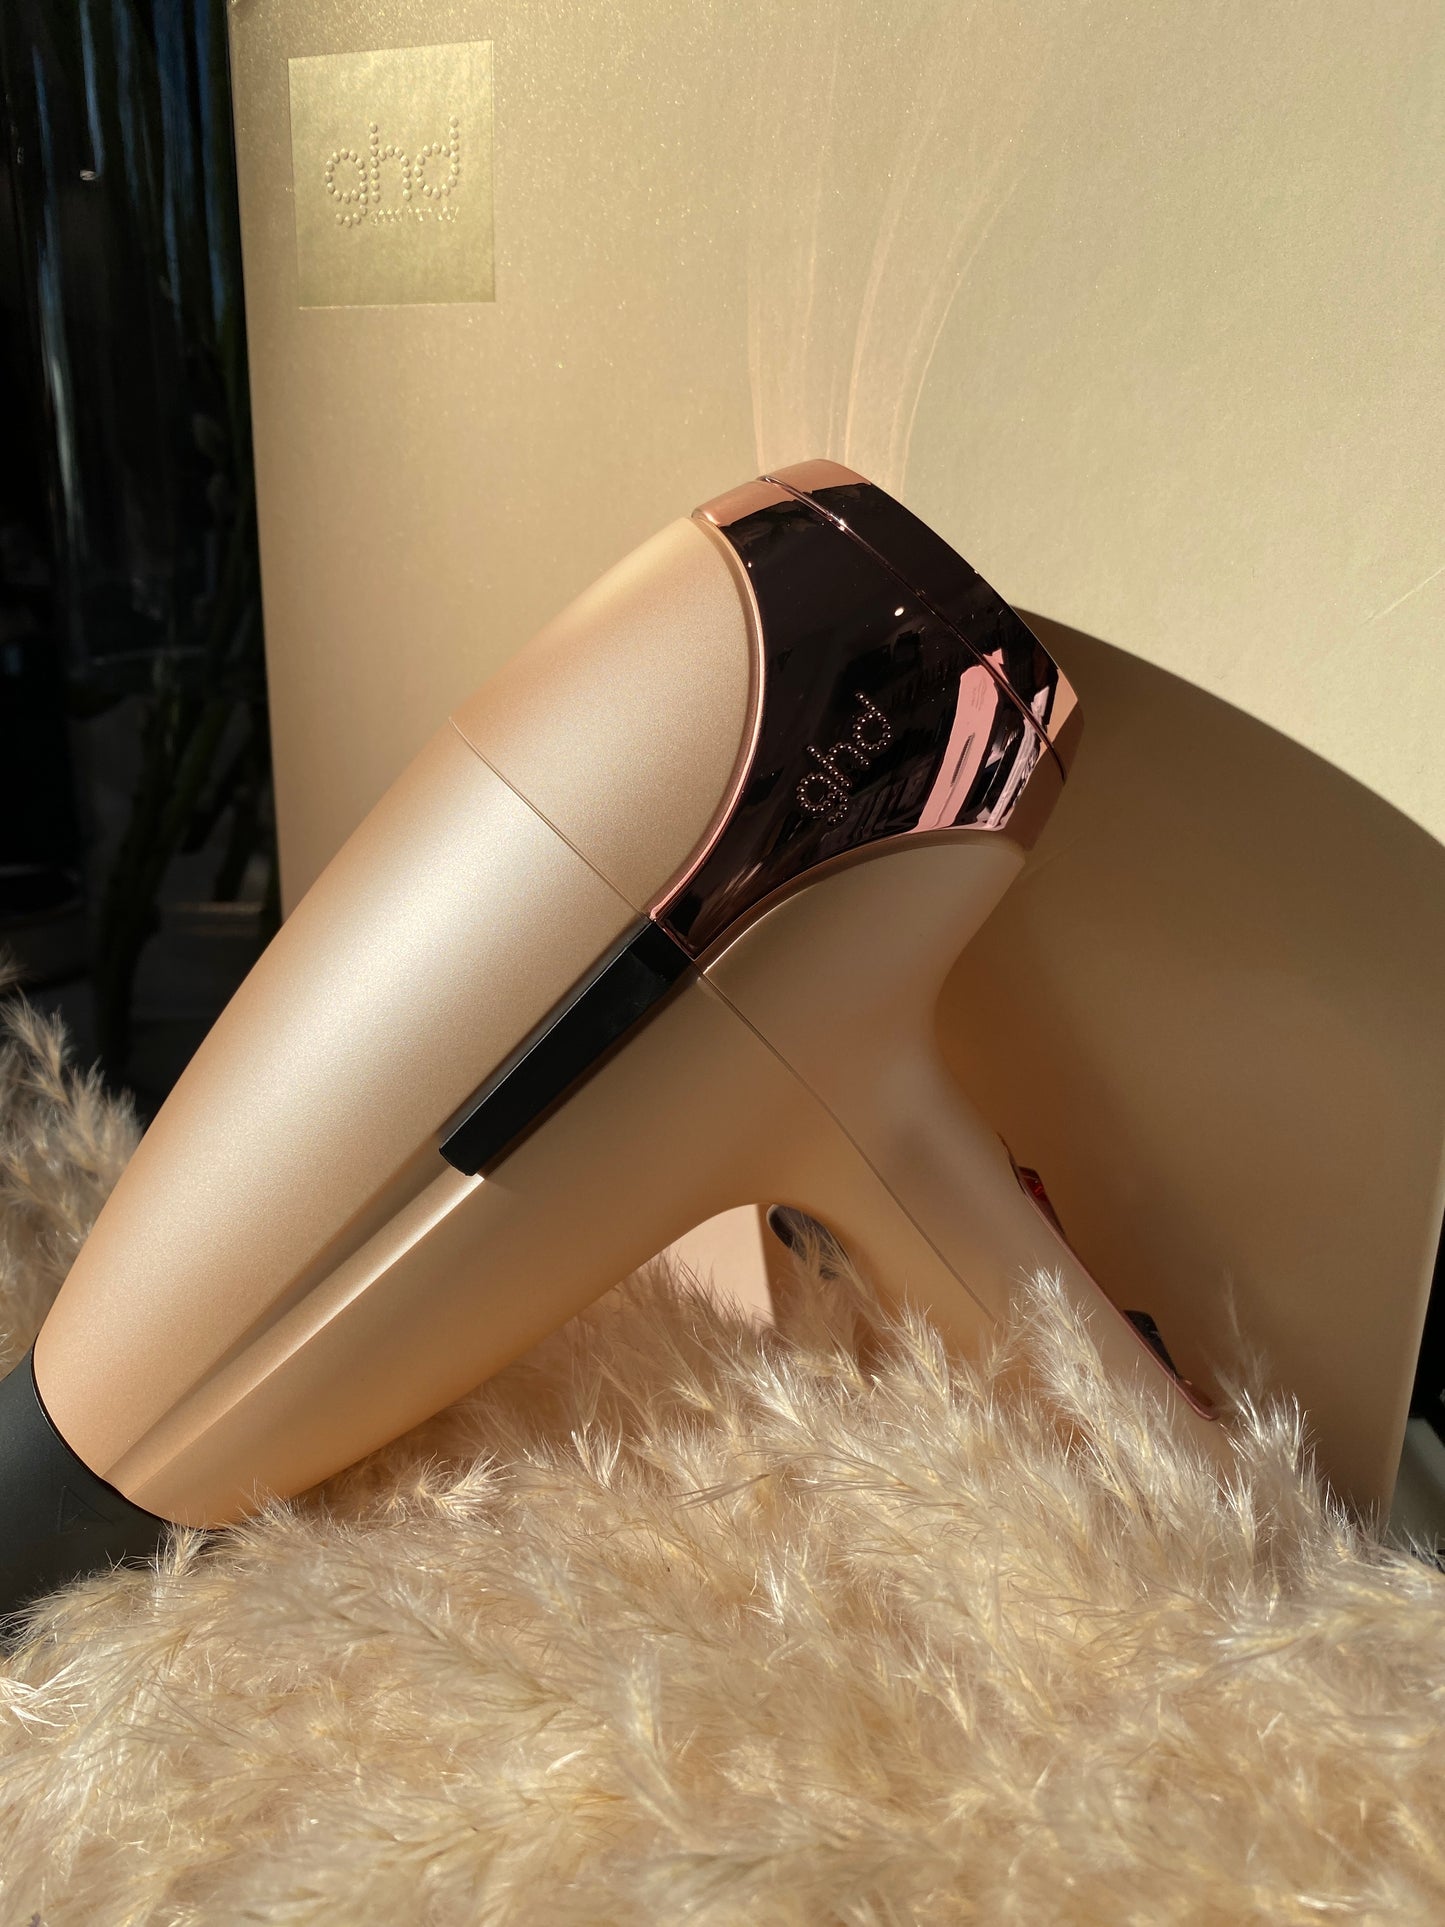 GHD HELIOS™ LIMITED EDITION PROFESSIONAL HAIR DRYER IN SUN-KISSED DESERT